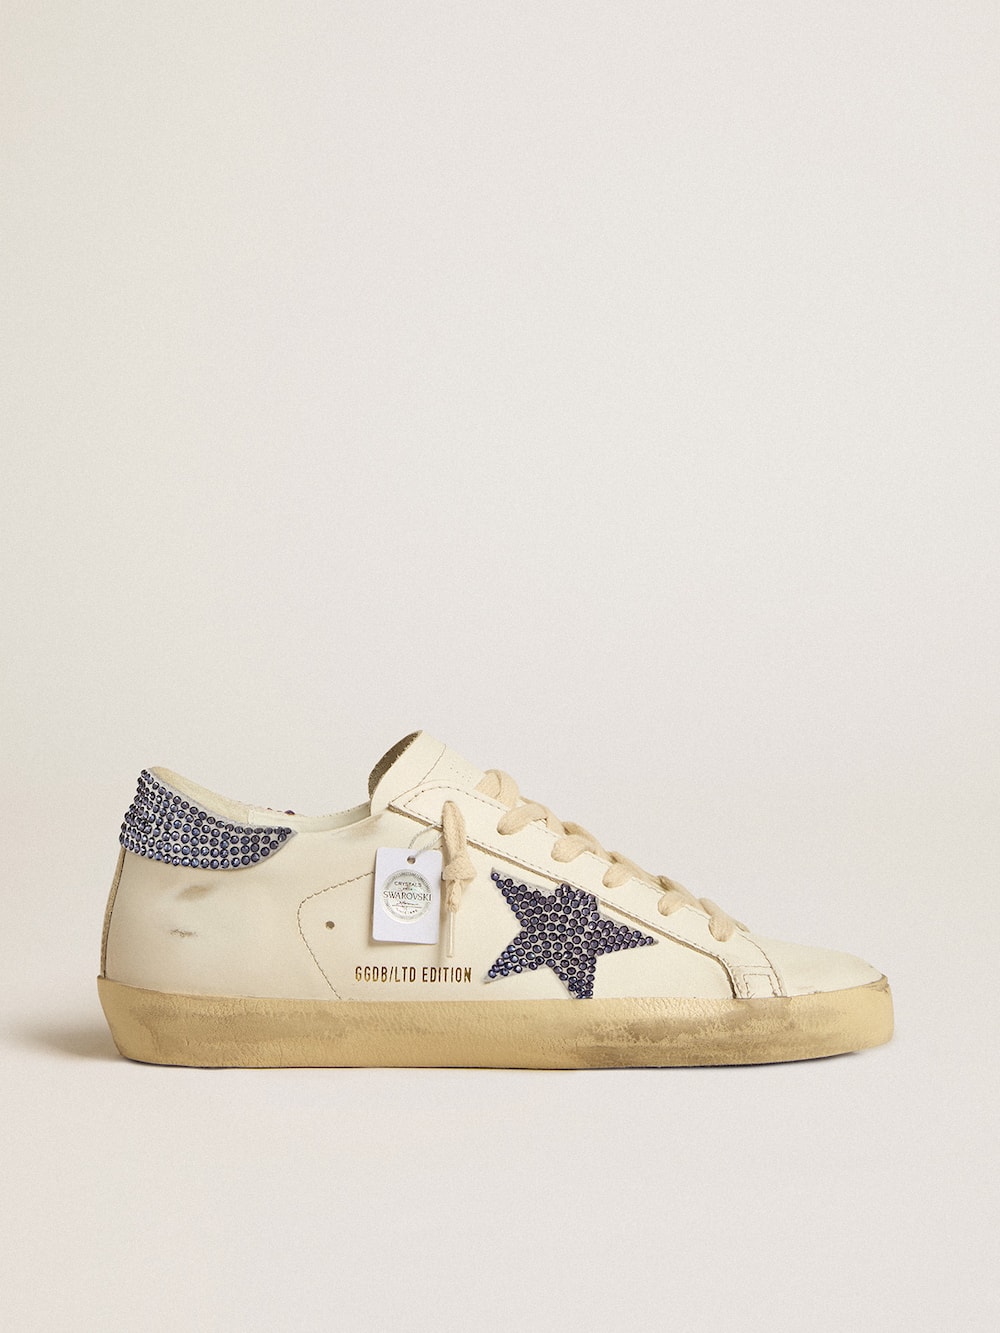 Golden Goose - Women’s Super-Star LTD with suede star and heel tab with Swarovski crystals in 